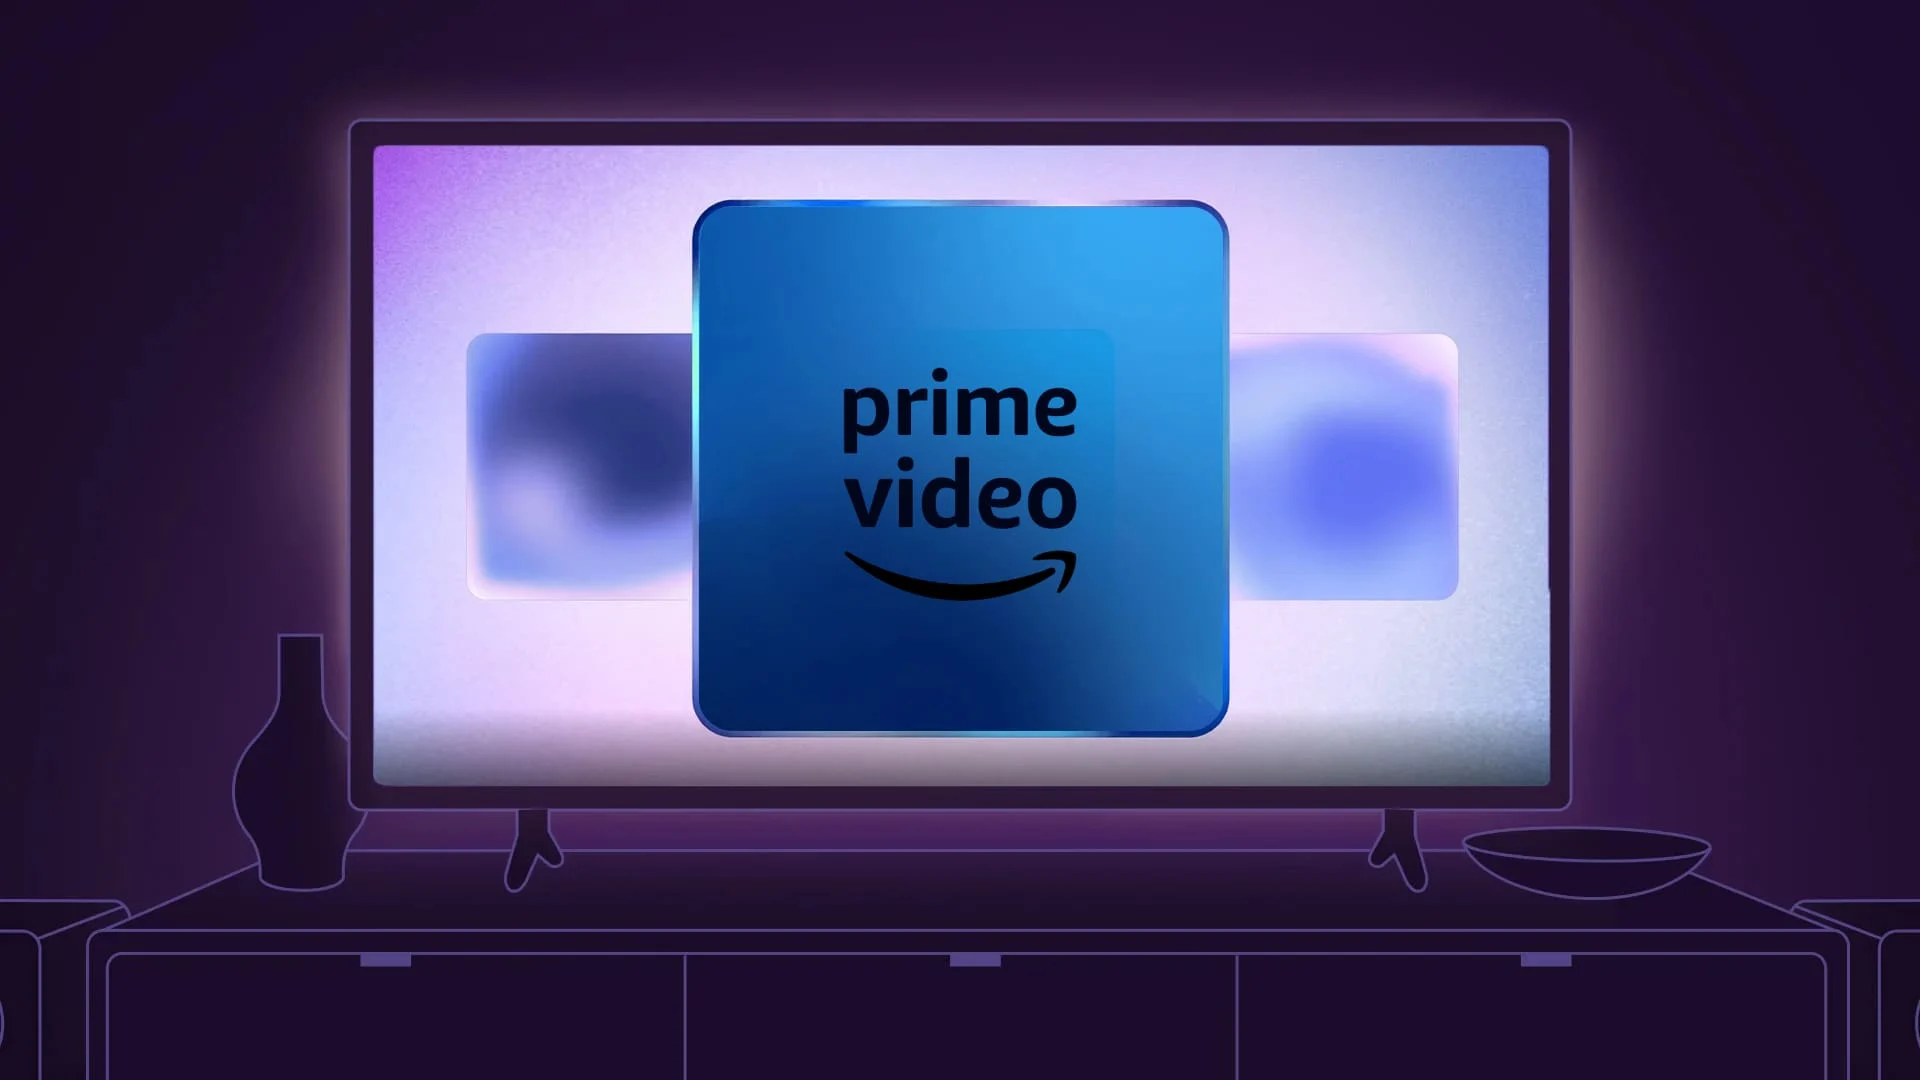 Amazon Prime Video won't let you watch Dolby Vision HDR videos without paying extra